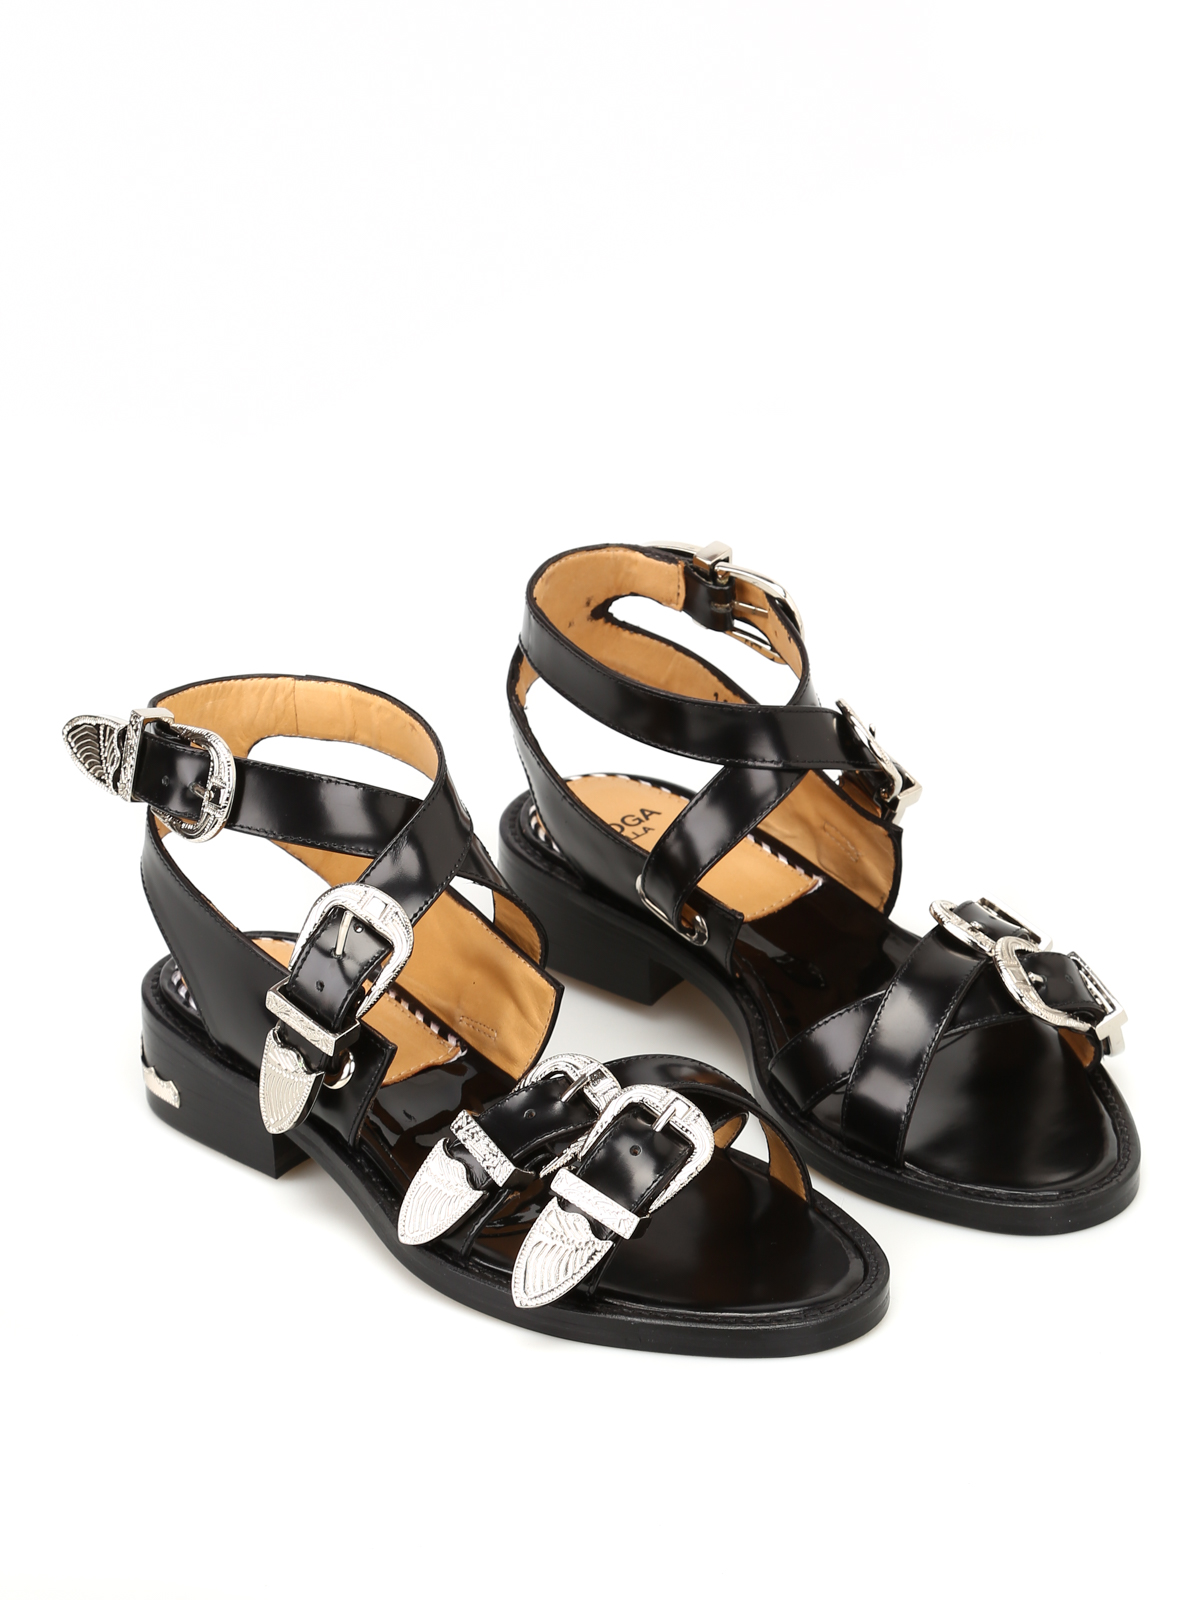 Sandals Toga - Leather sandals with four buckles - AJ885BLACKPOLIDO